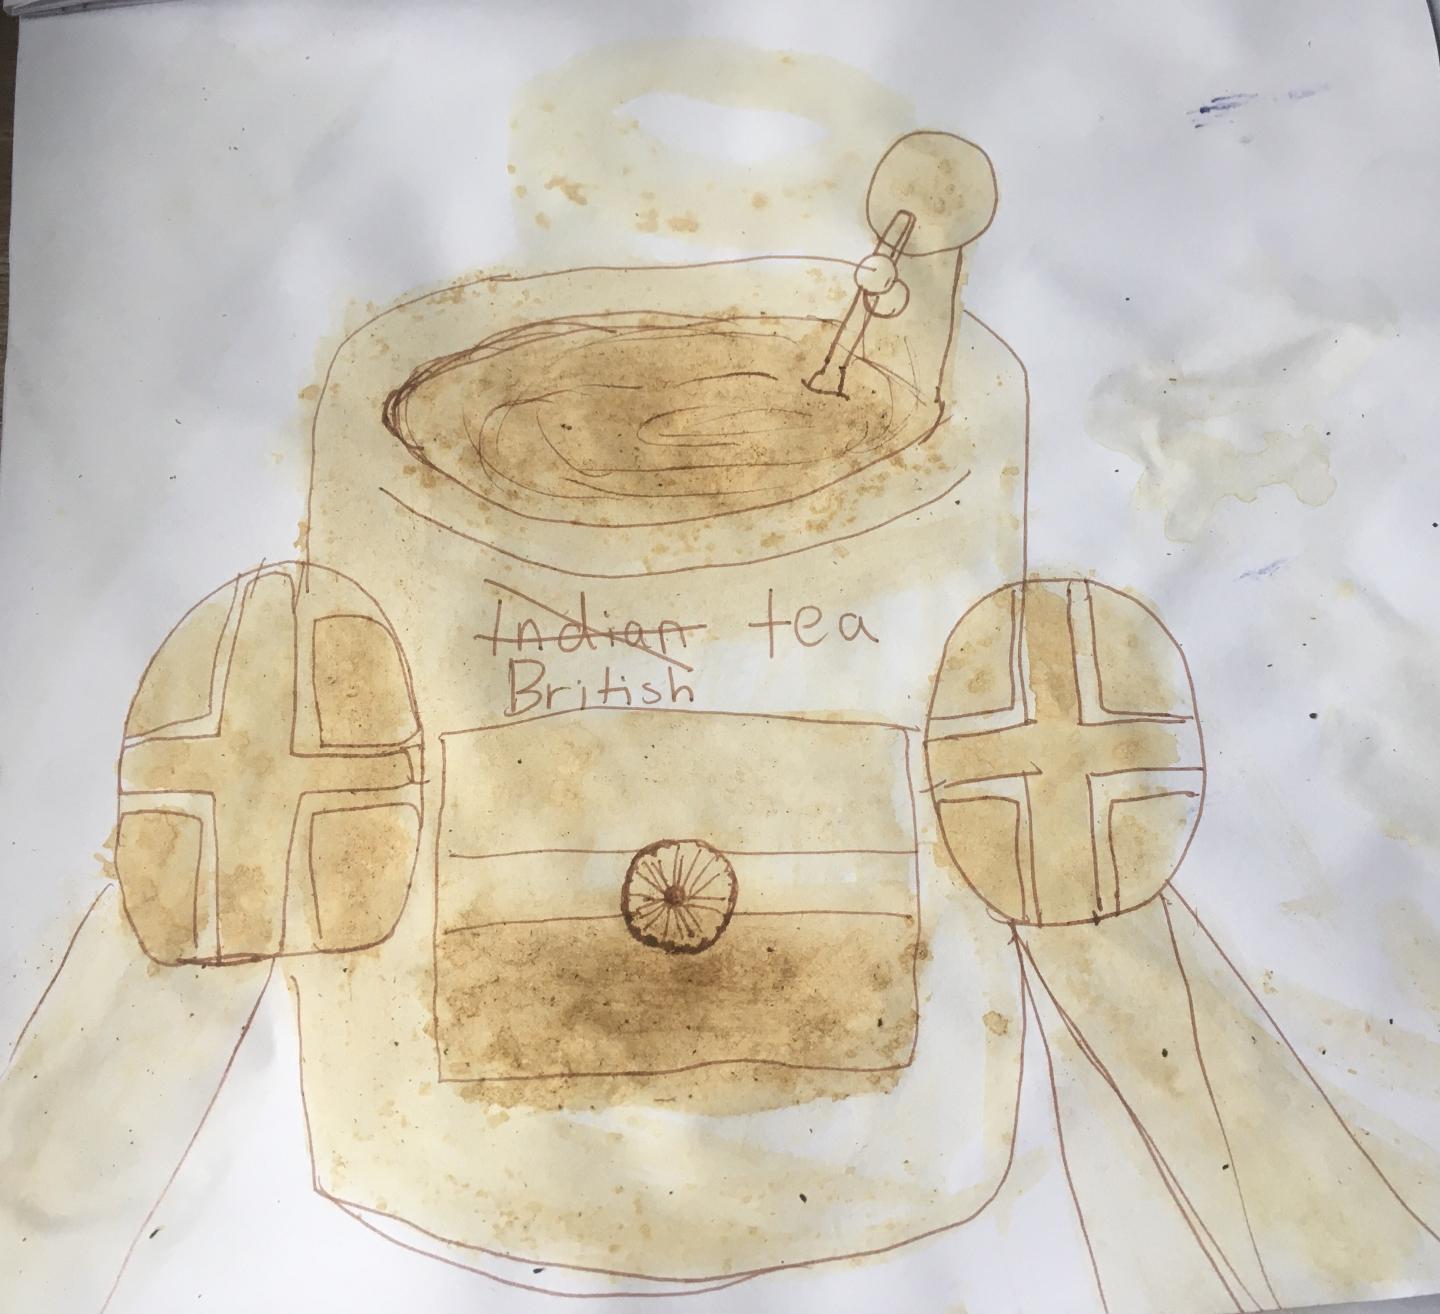 A drawing made with tea 